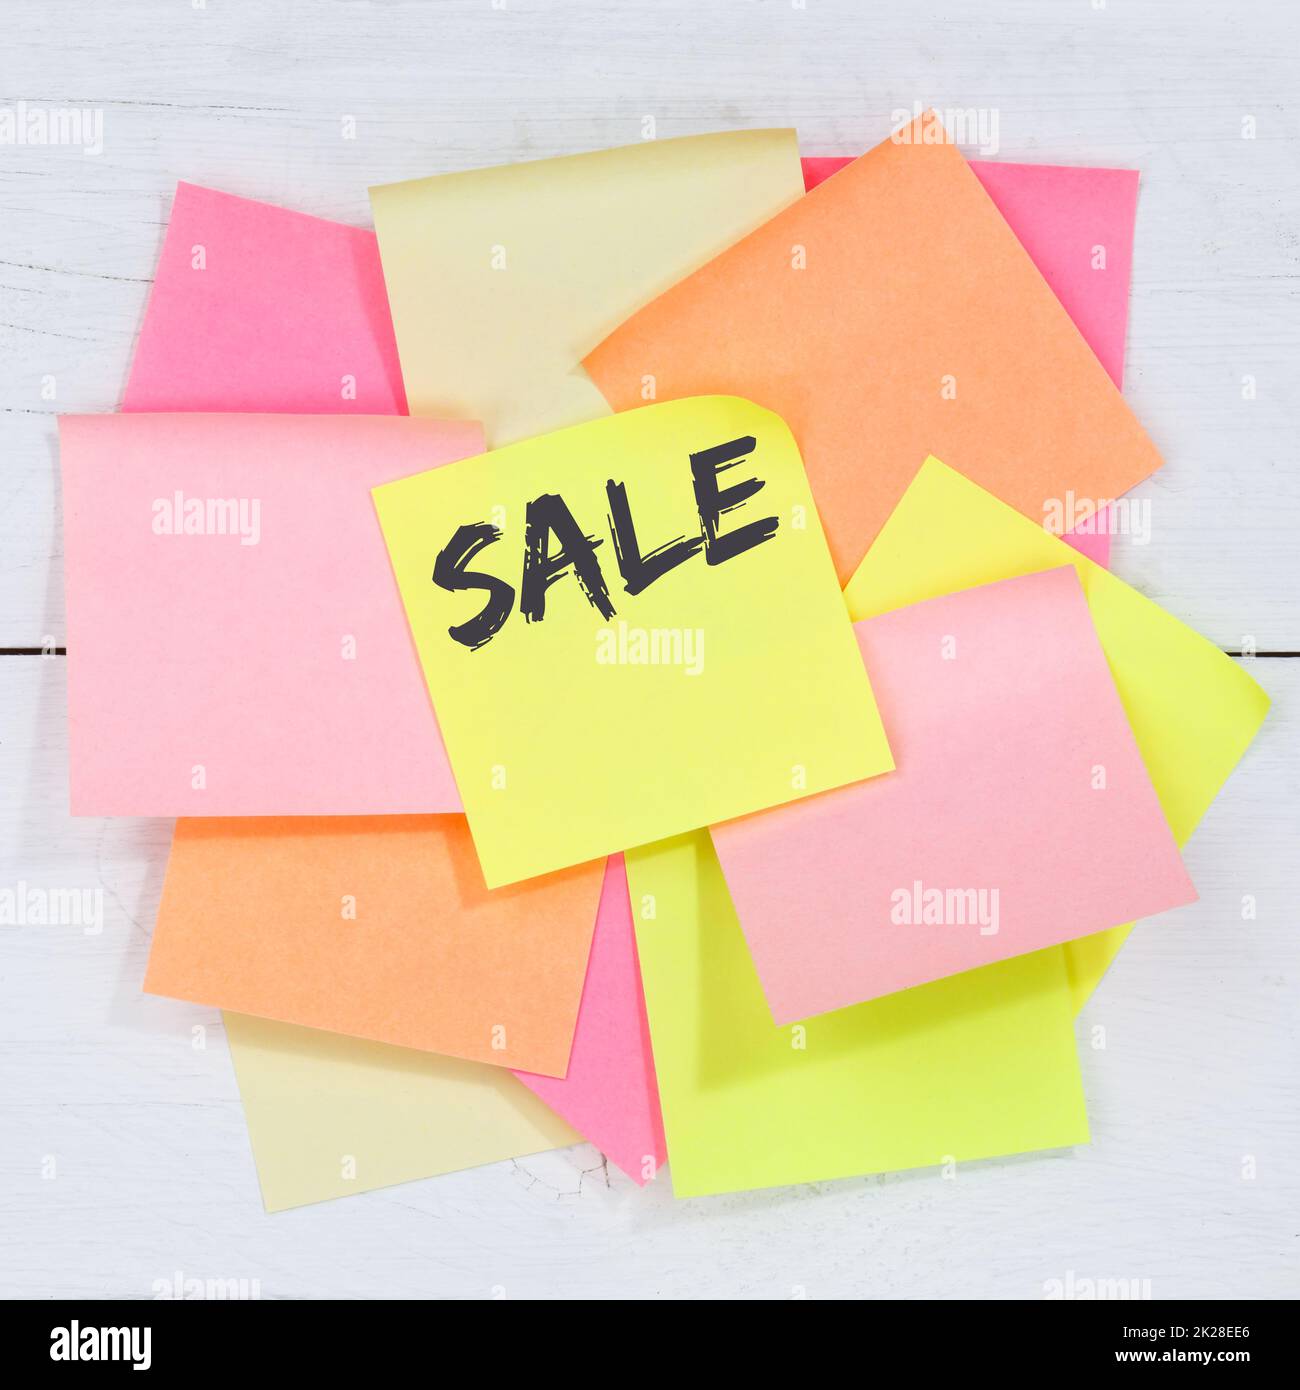 Sale shopping special offer business concept desk note paper Stock Photo